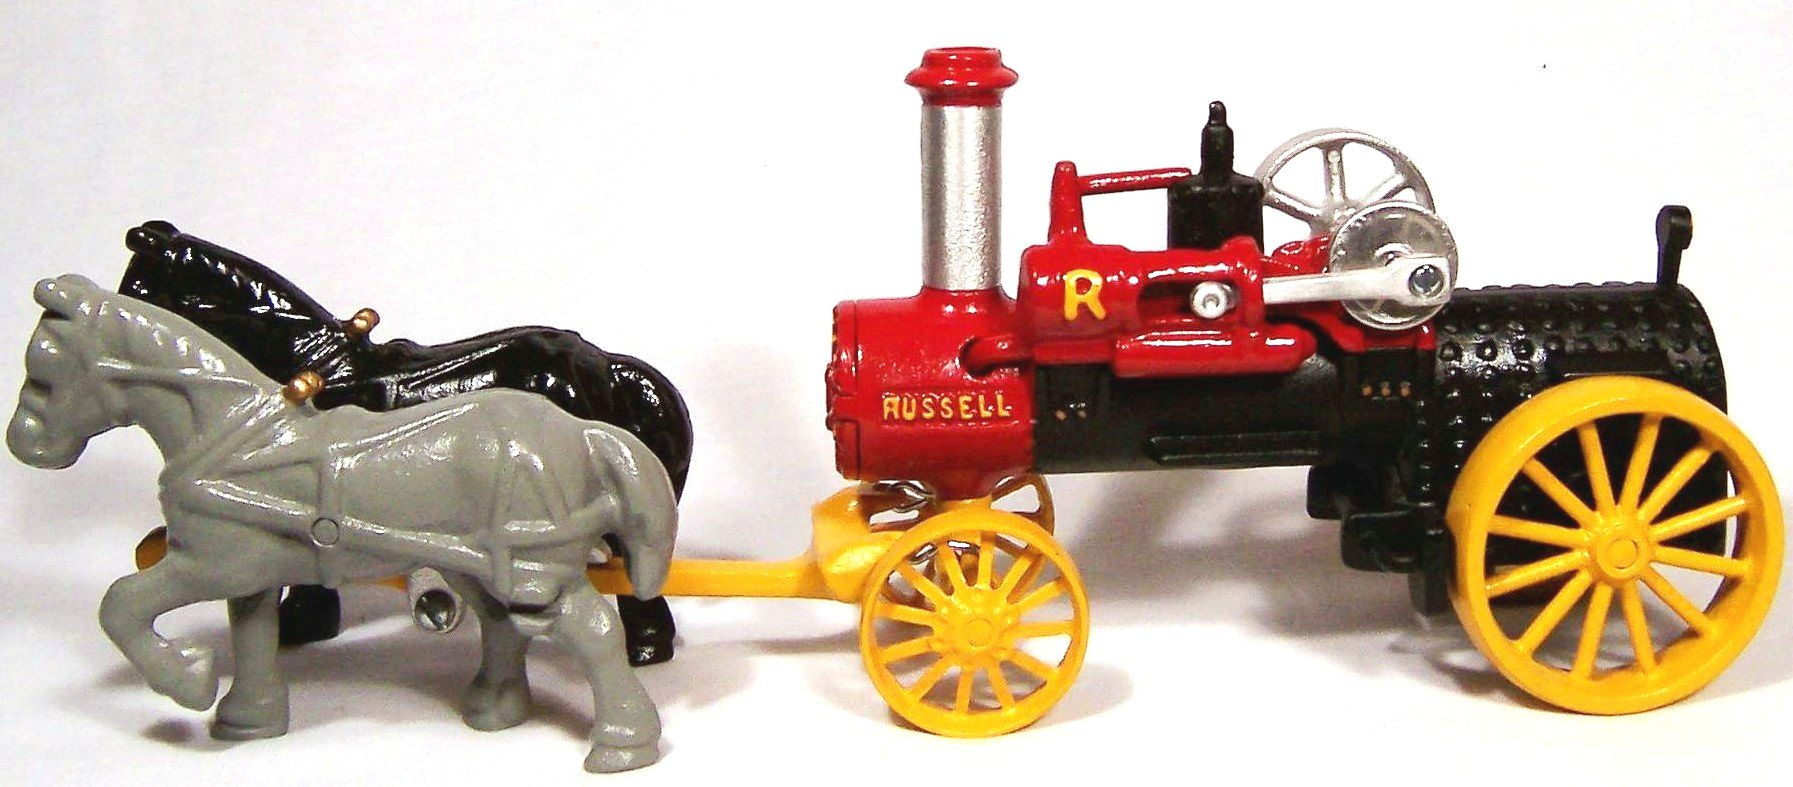 Portable Russel Model Toy